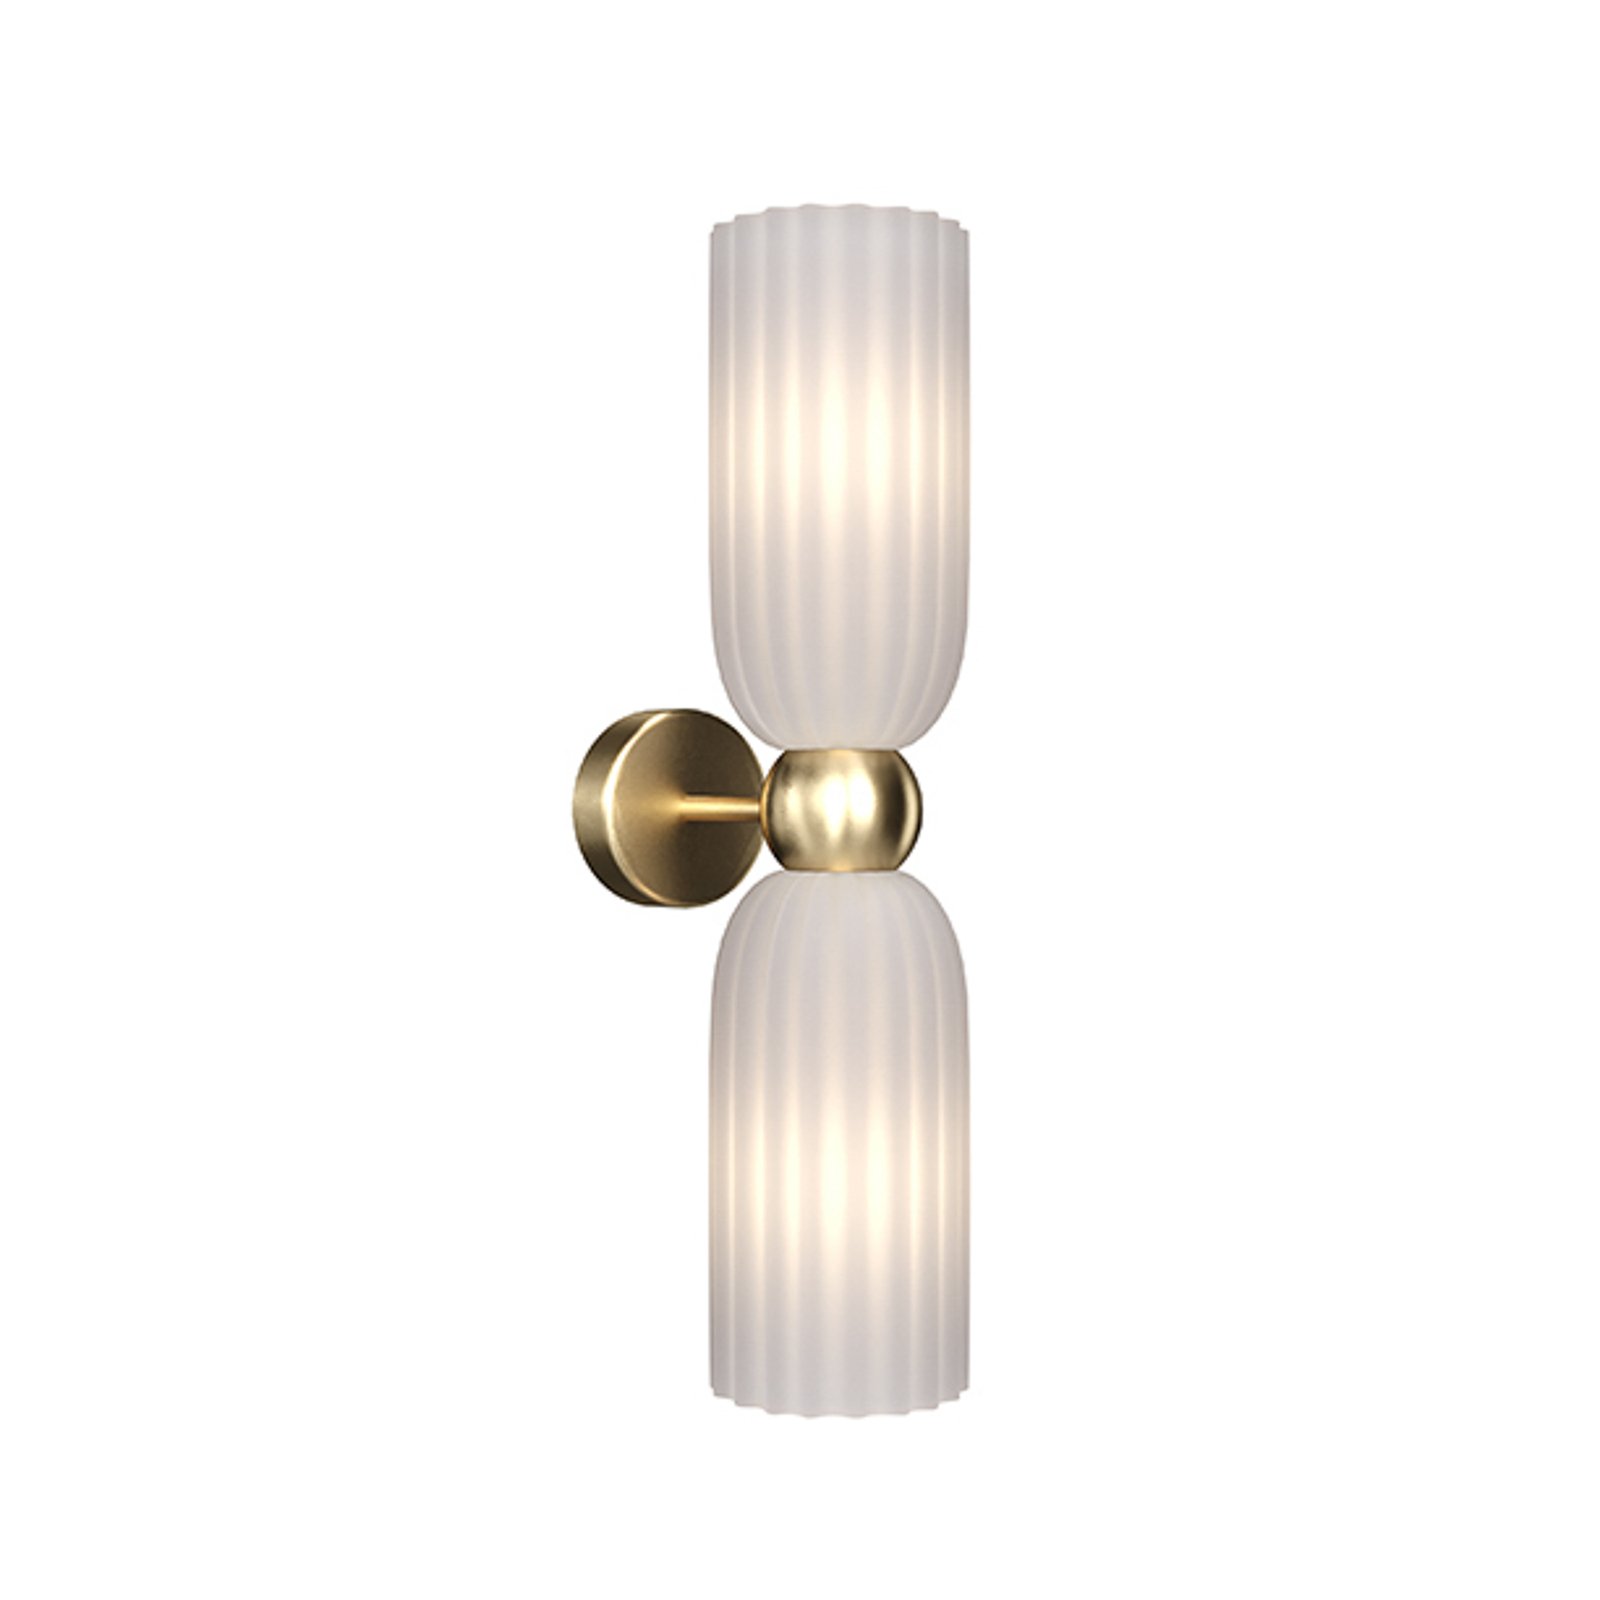 Maytoni Antic wall light up and down, white